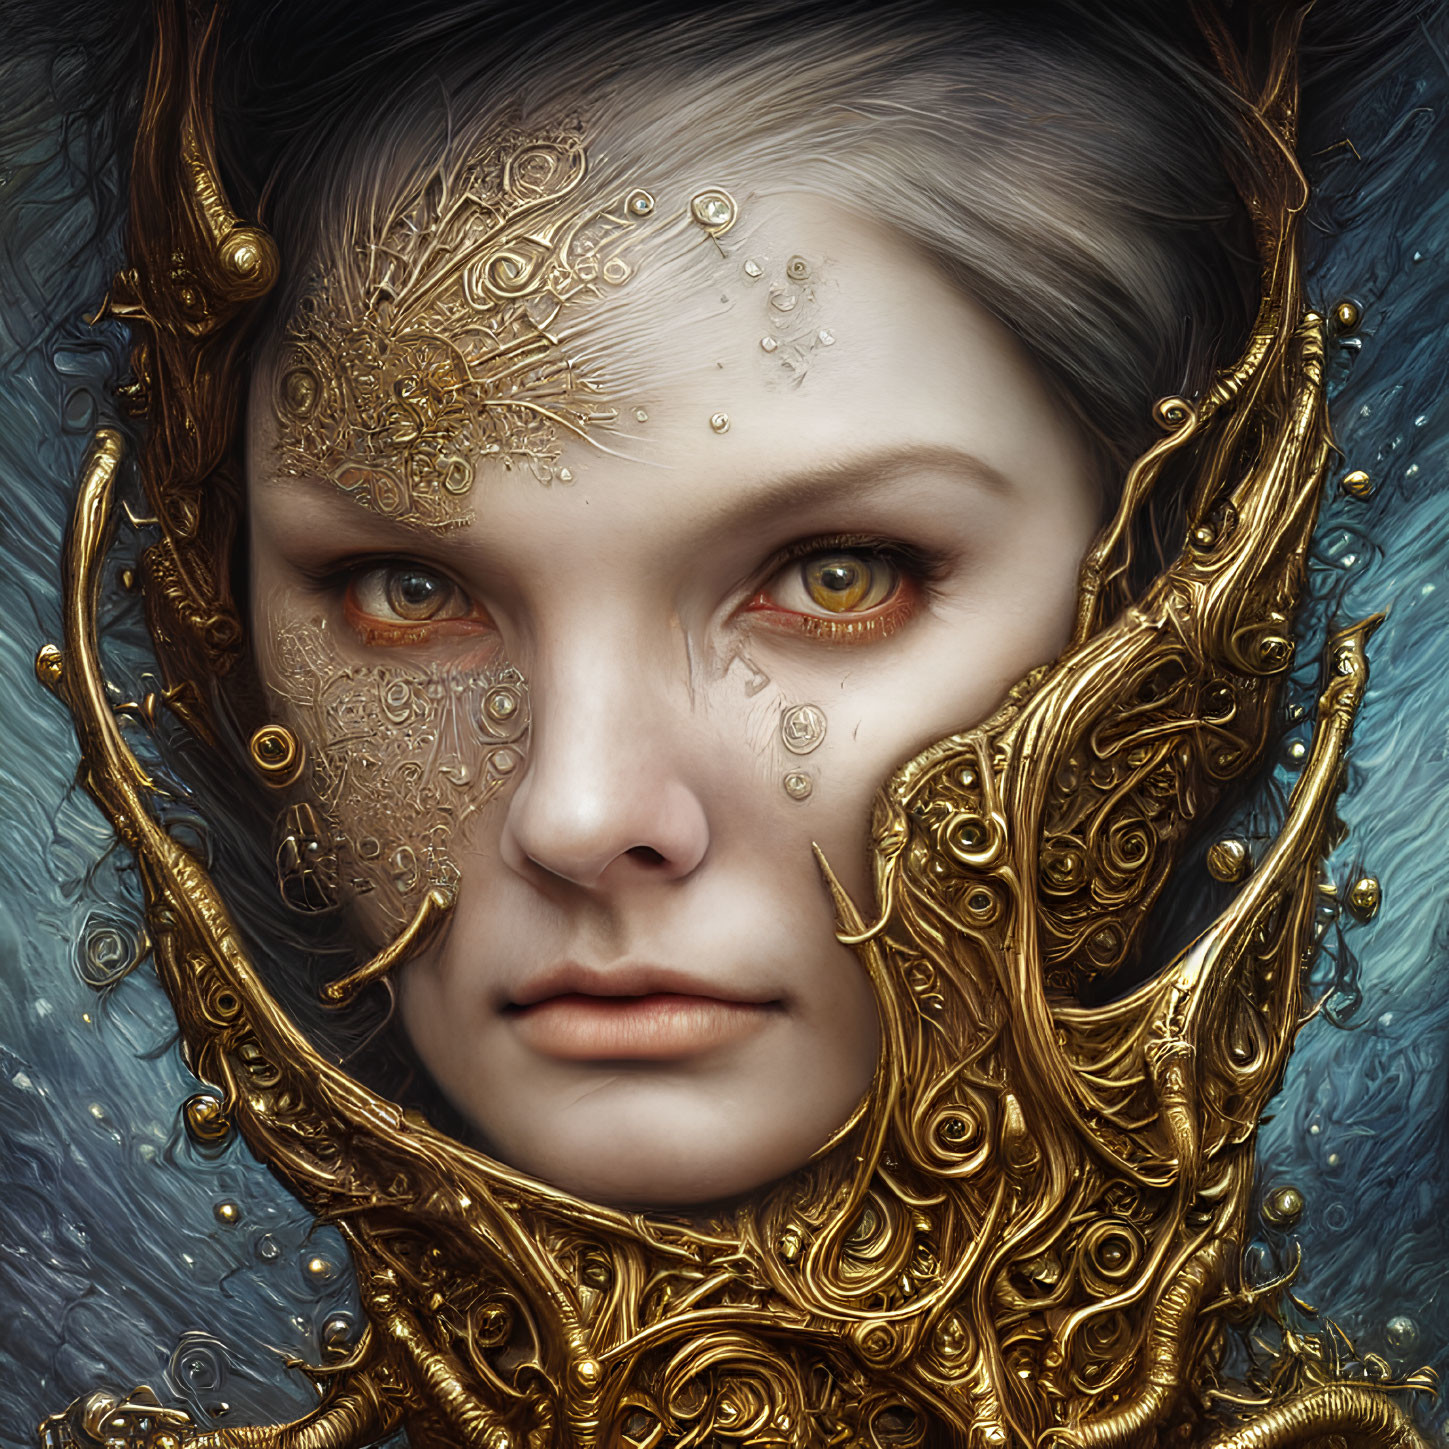 Detailed Gold Filigree Woman Portrait with Intense Eyes